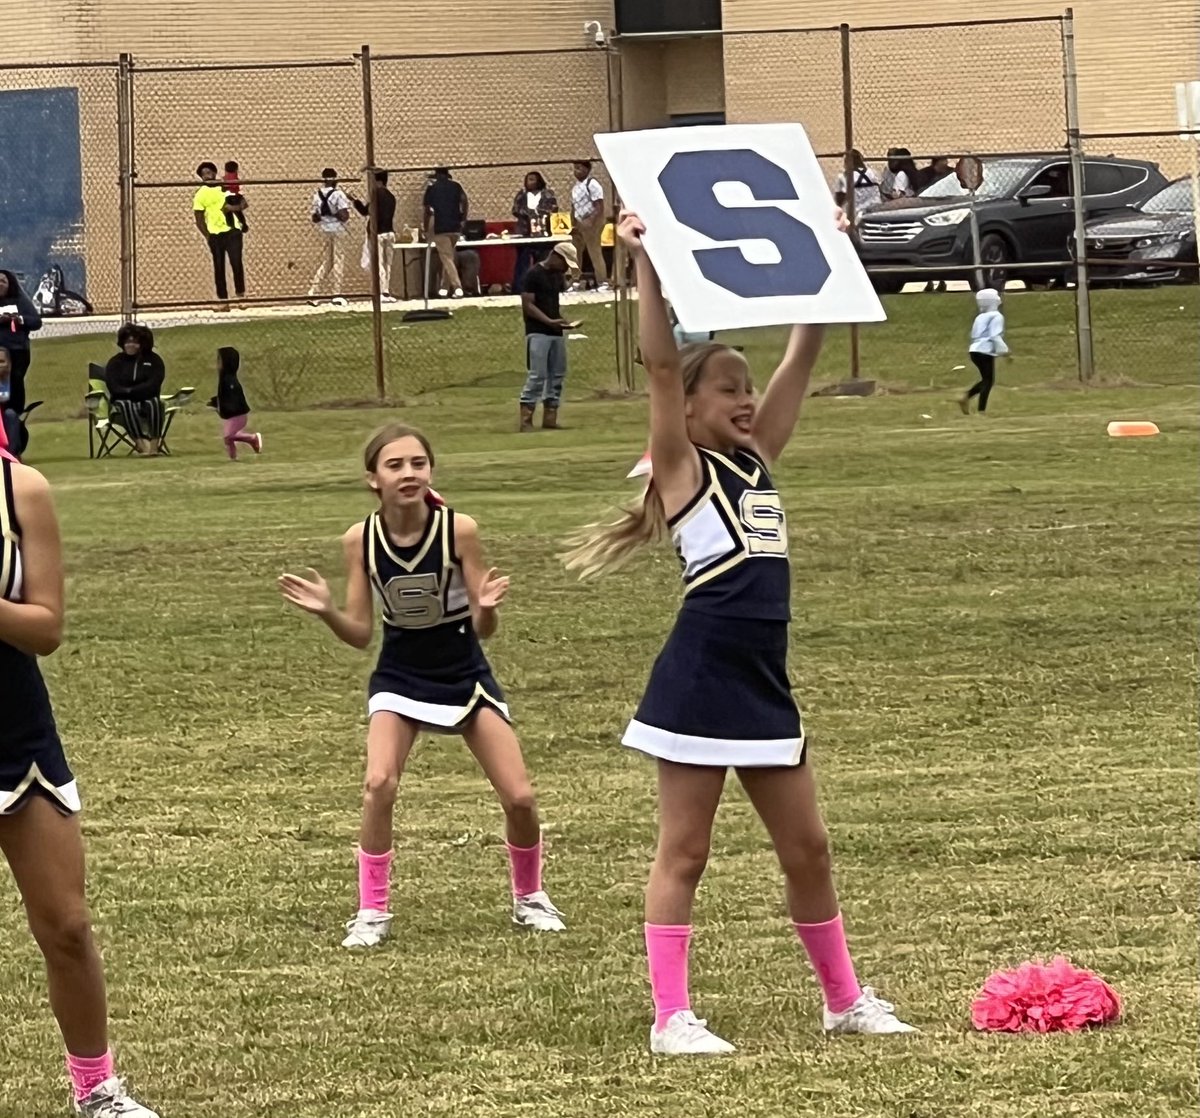 Semmes Middle School cheerleaders performing at halftime of the Semmes vs Pillans playoff football game. #AimForExcellence #TeamMCPSS #LearningLeading